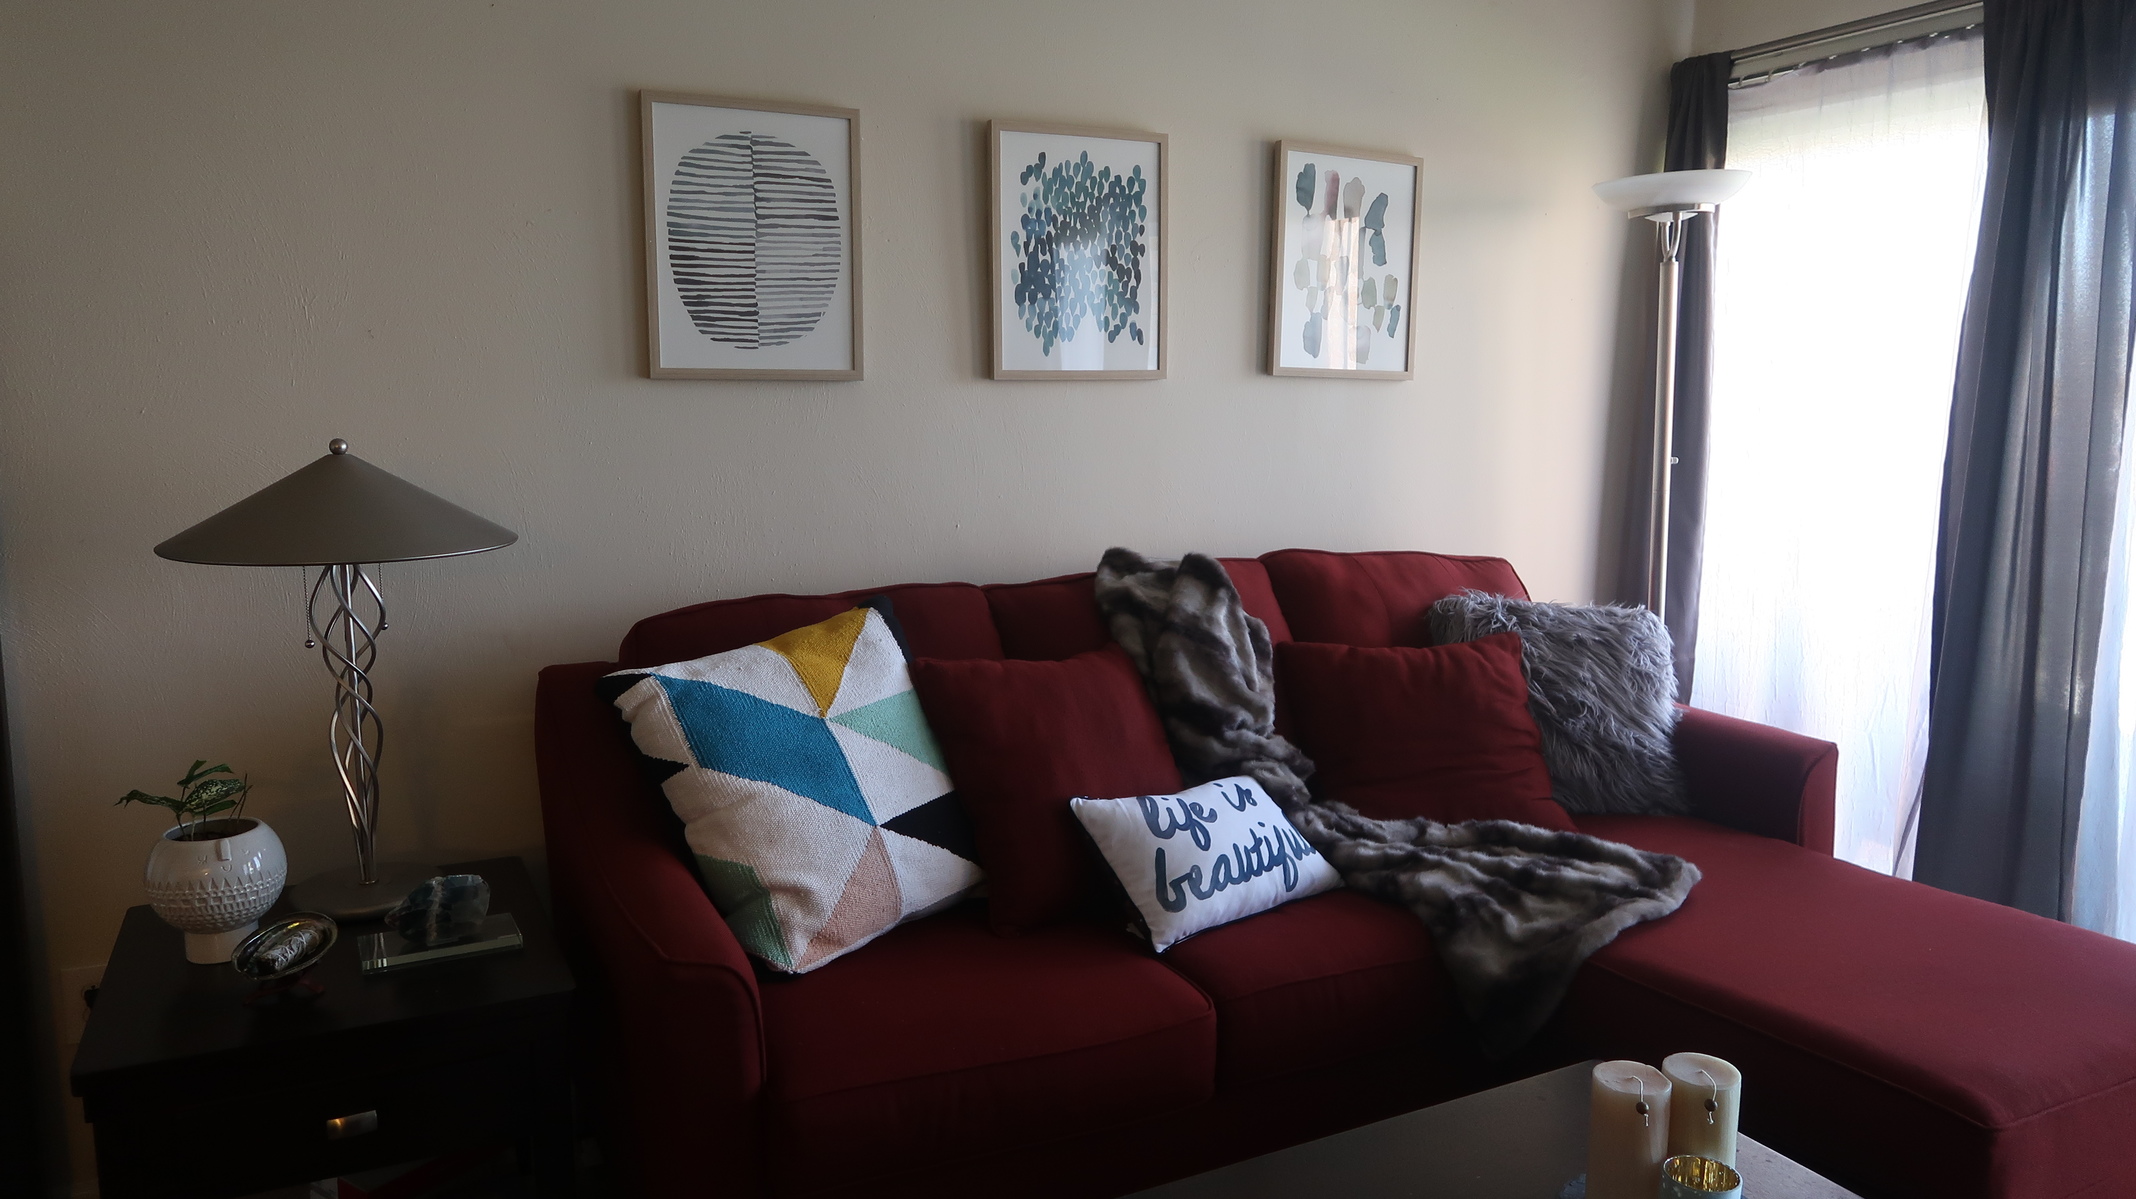 3 Ways To Work Around A Red Sofa When Styling Your Living Room Decor Naturally Glam